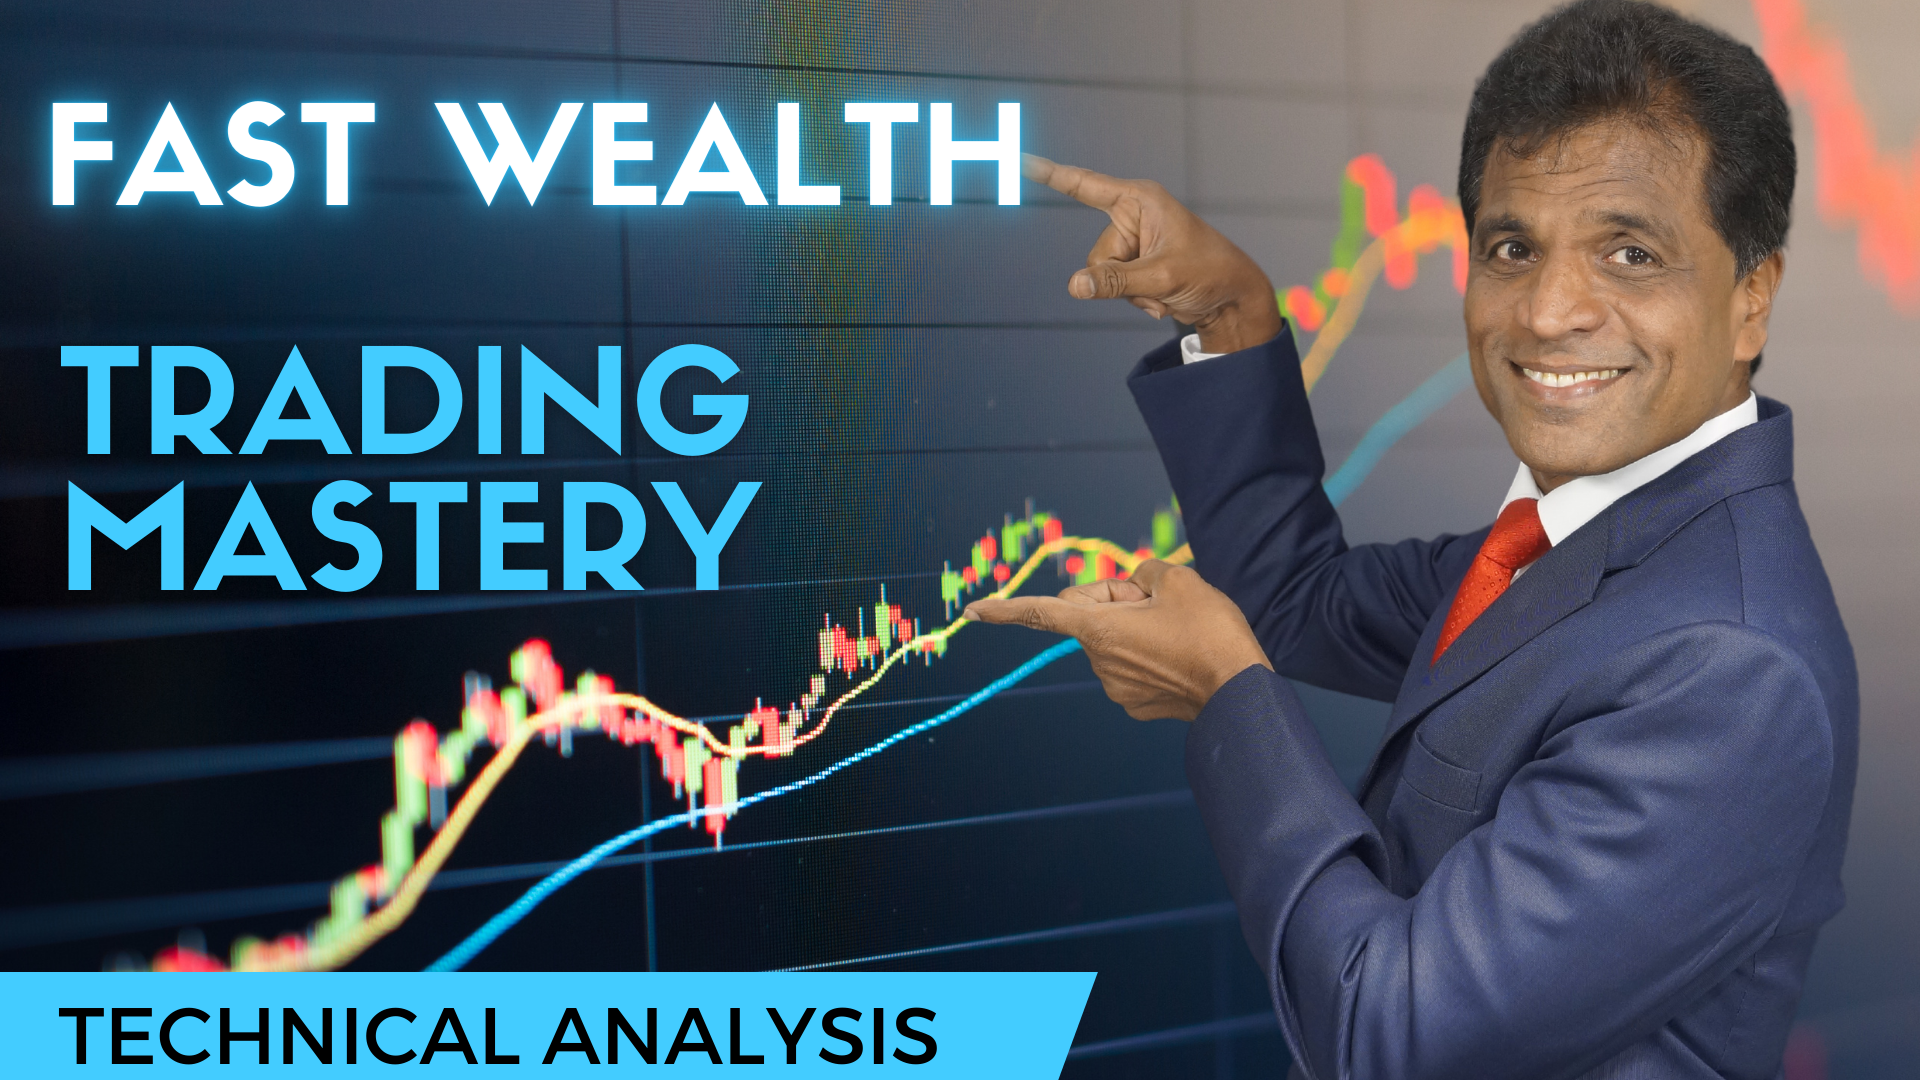 TRADING MASTERY COURSE- Latest Wealth